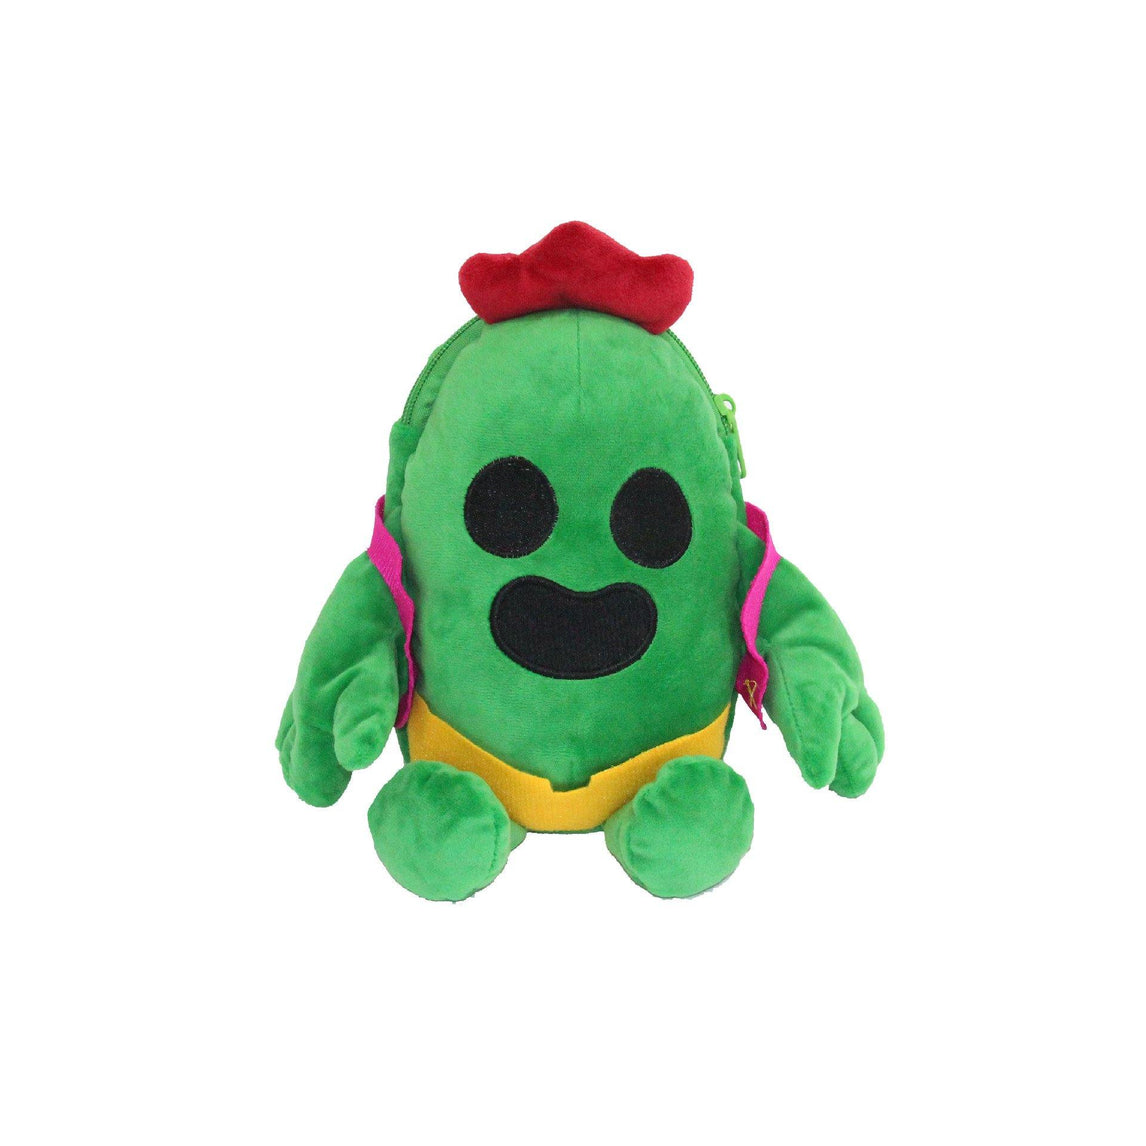 Brawl Stars Cartoon Cactus Mobile Phone Bag With Plush Toy Messenger B Prosgifts - the cactus from brawl stars